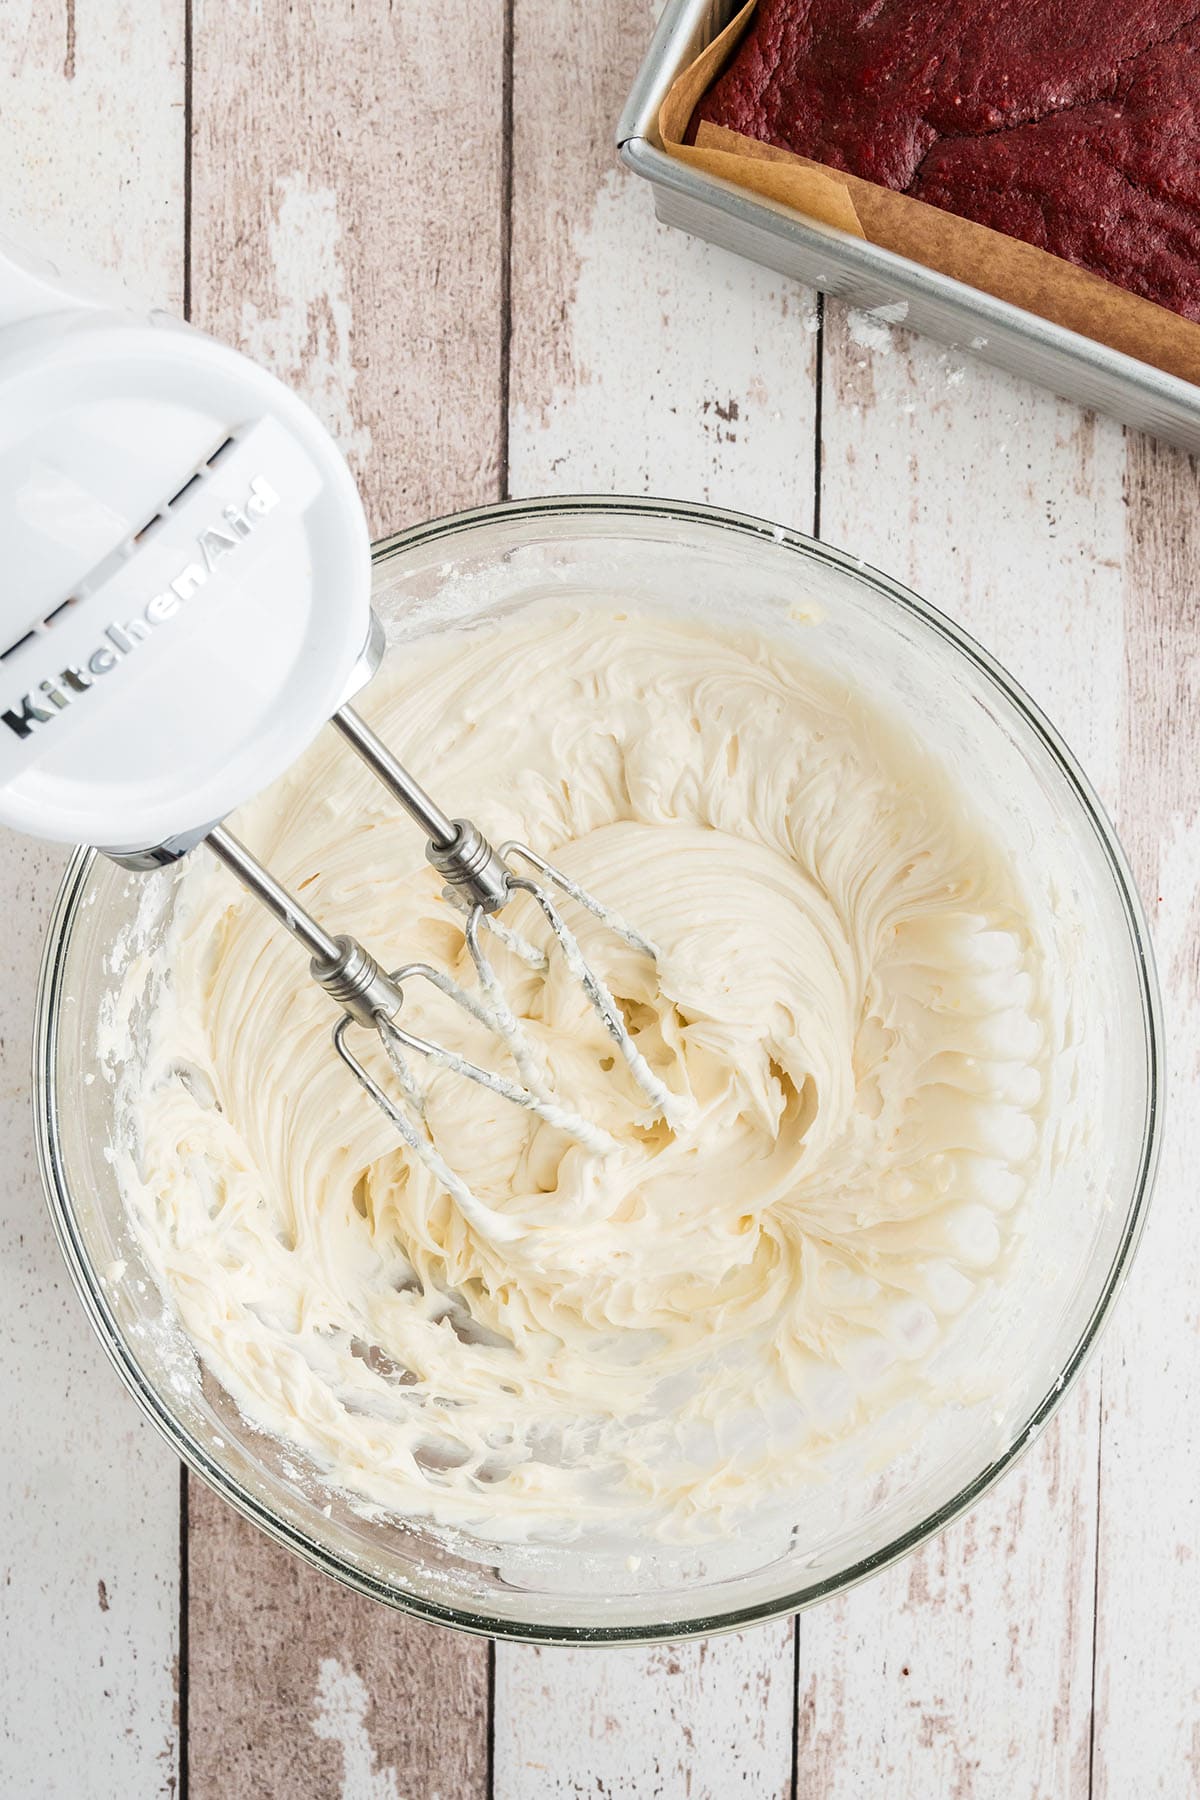 making cream cheese frosting with an electric hand mixer in a glass mixing bowl